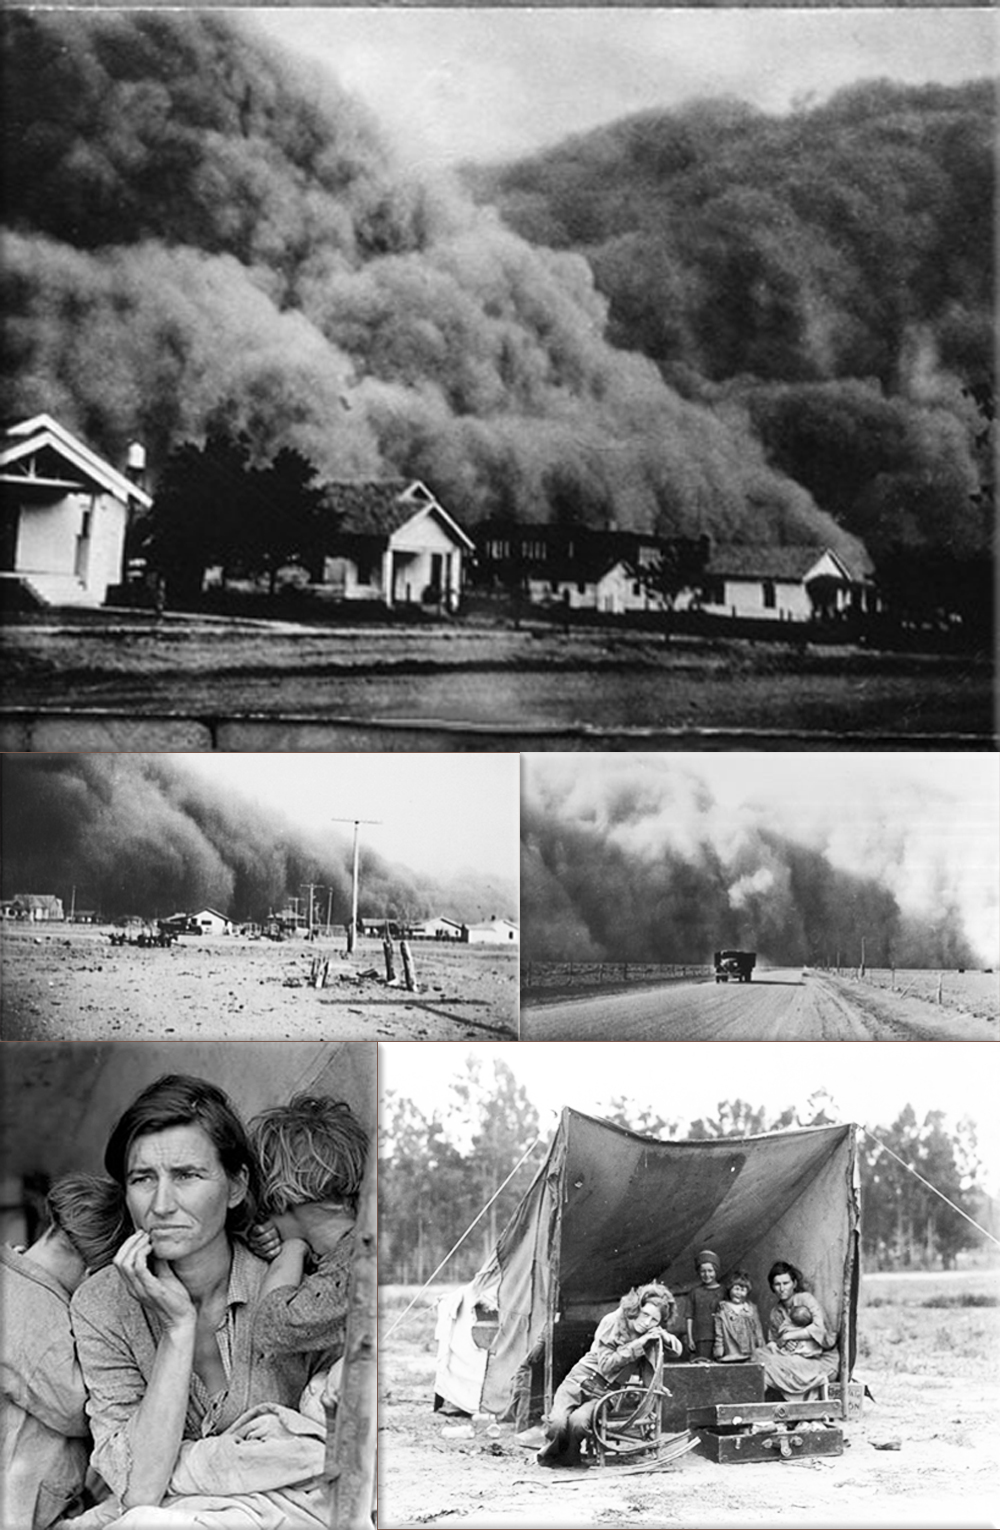 The dust bowl heat wave reaches its peak, sending temperatures to 109°F (44°C) in Chicago and 104°F (40°C) in Milwaukee, Wisconsin on July 24th, 1935